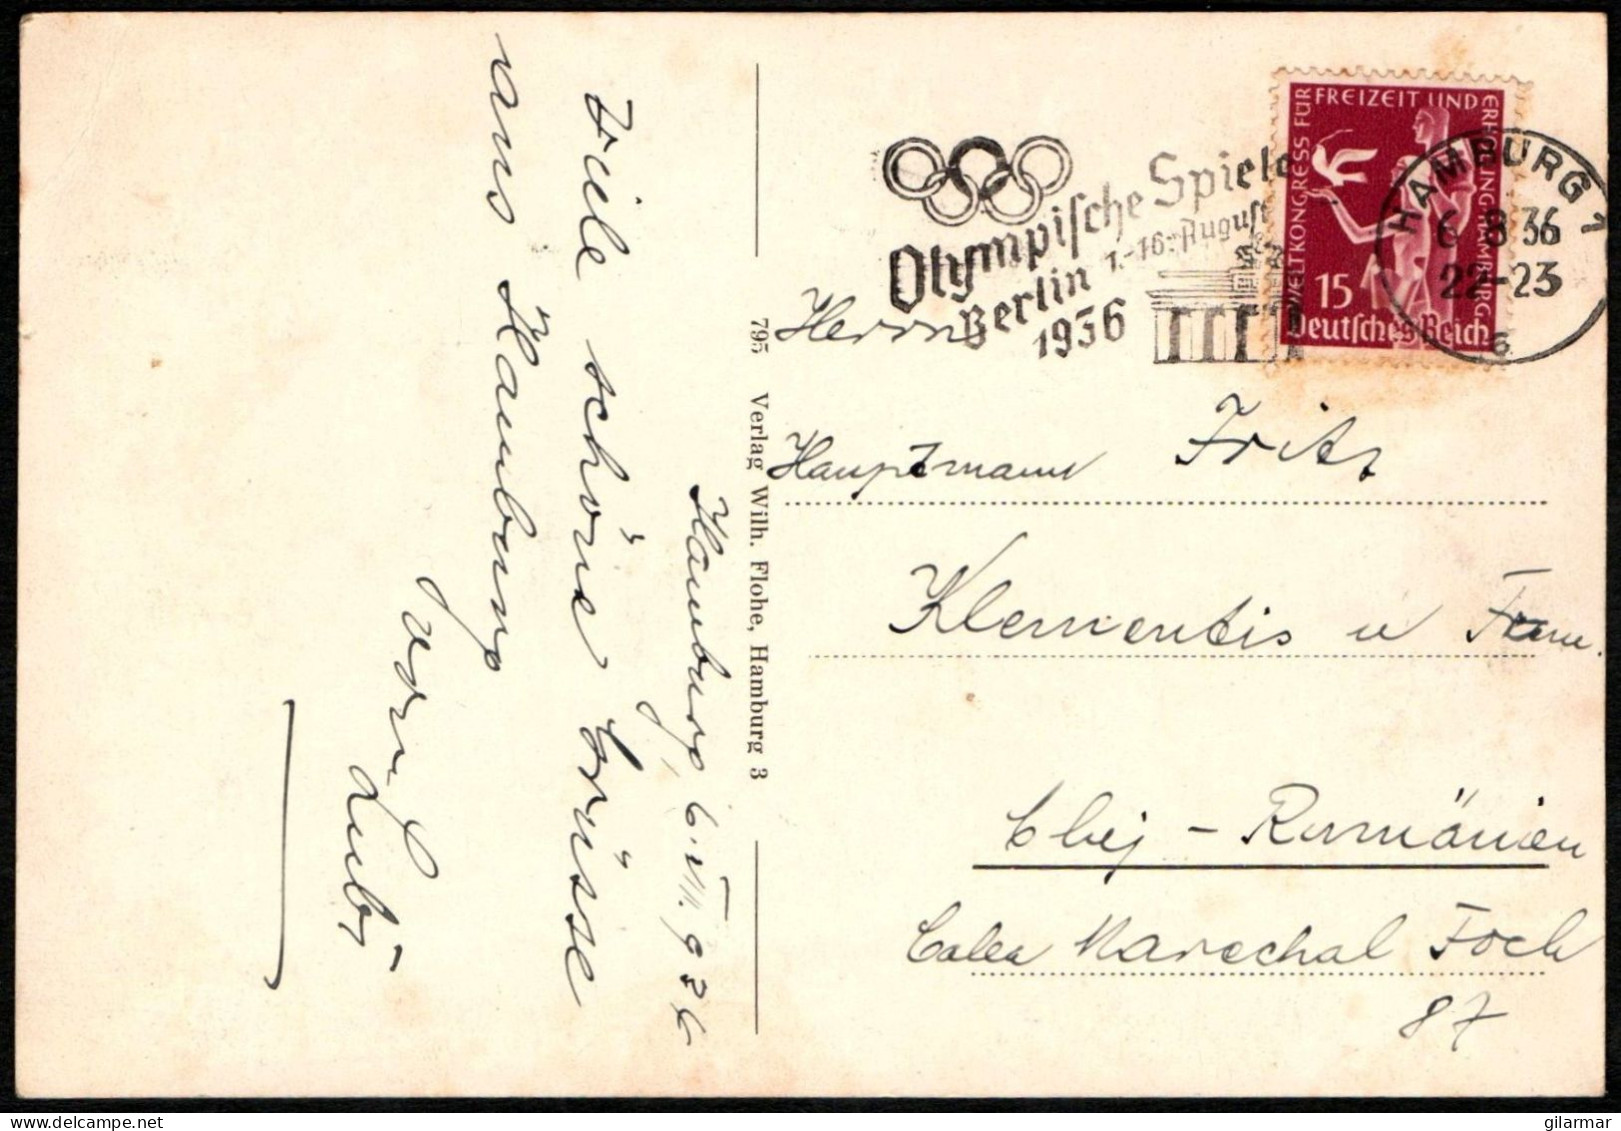 GERMANY HAMBURG 1936 - OLYMPIC GAMES BERLIN '36 - MAILED CARD - G - Sommer 1936: Berlin